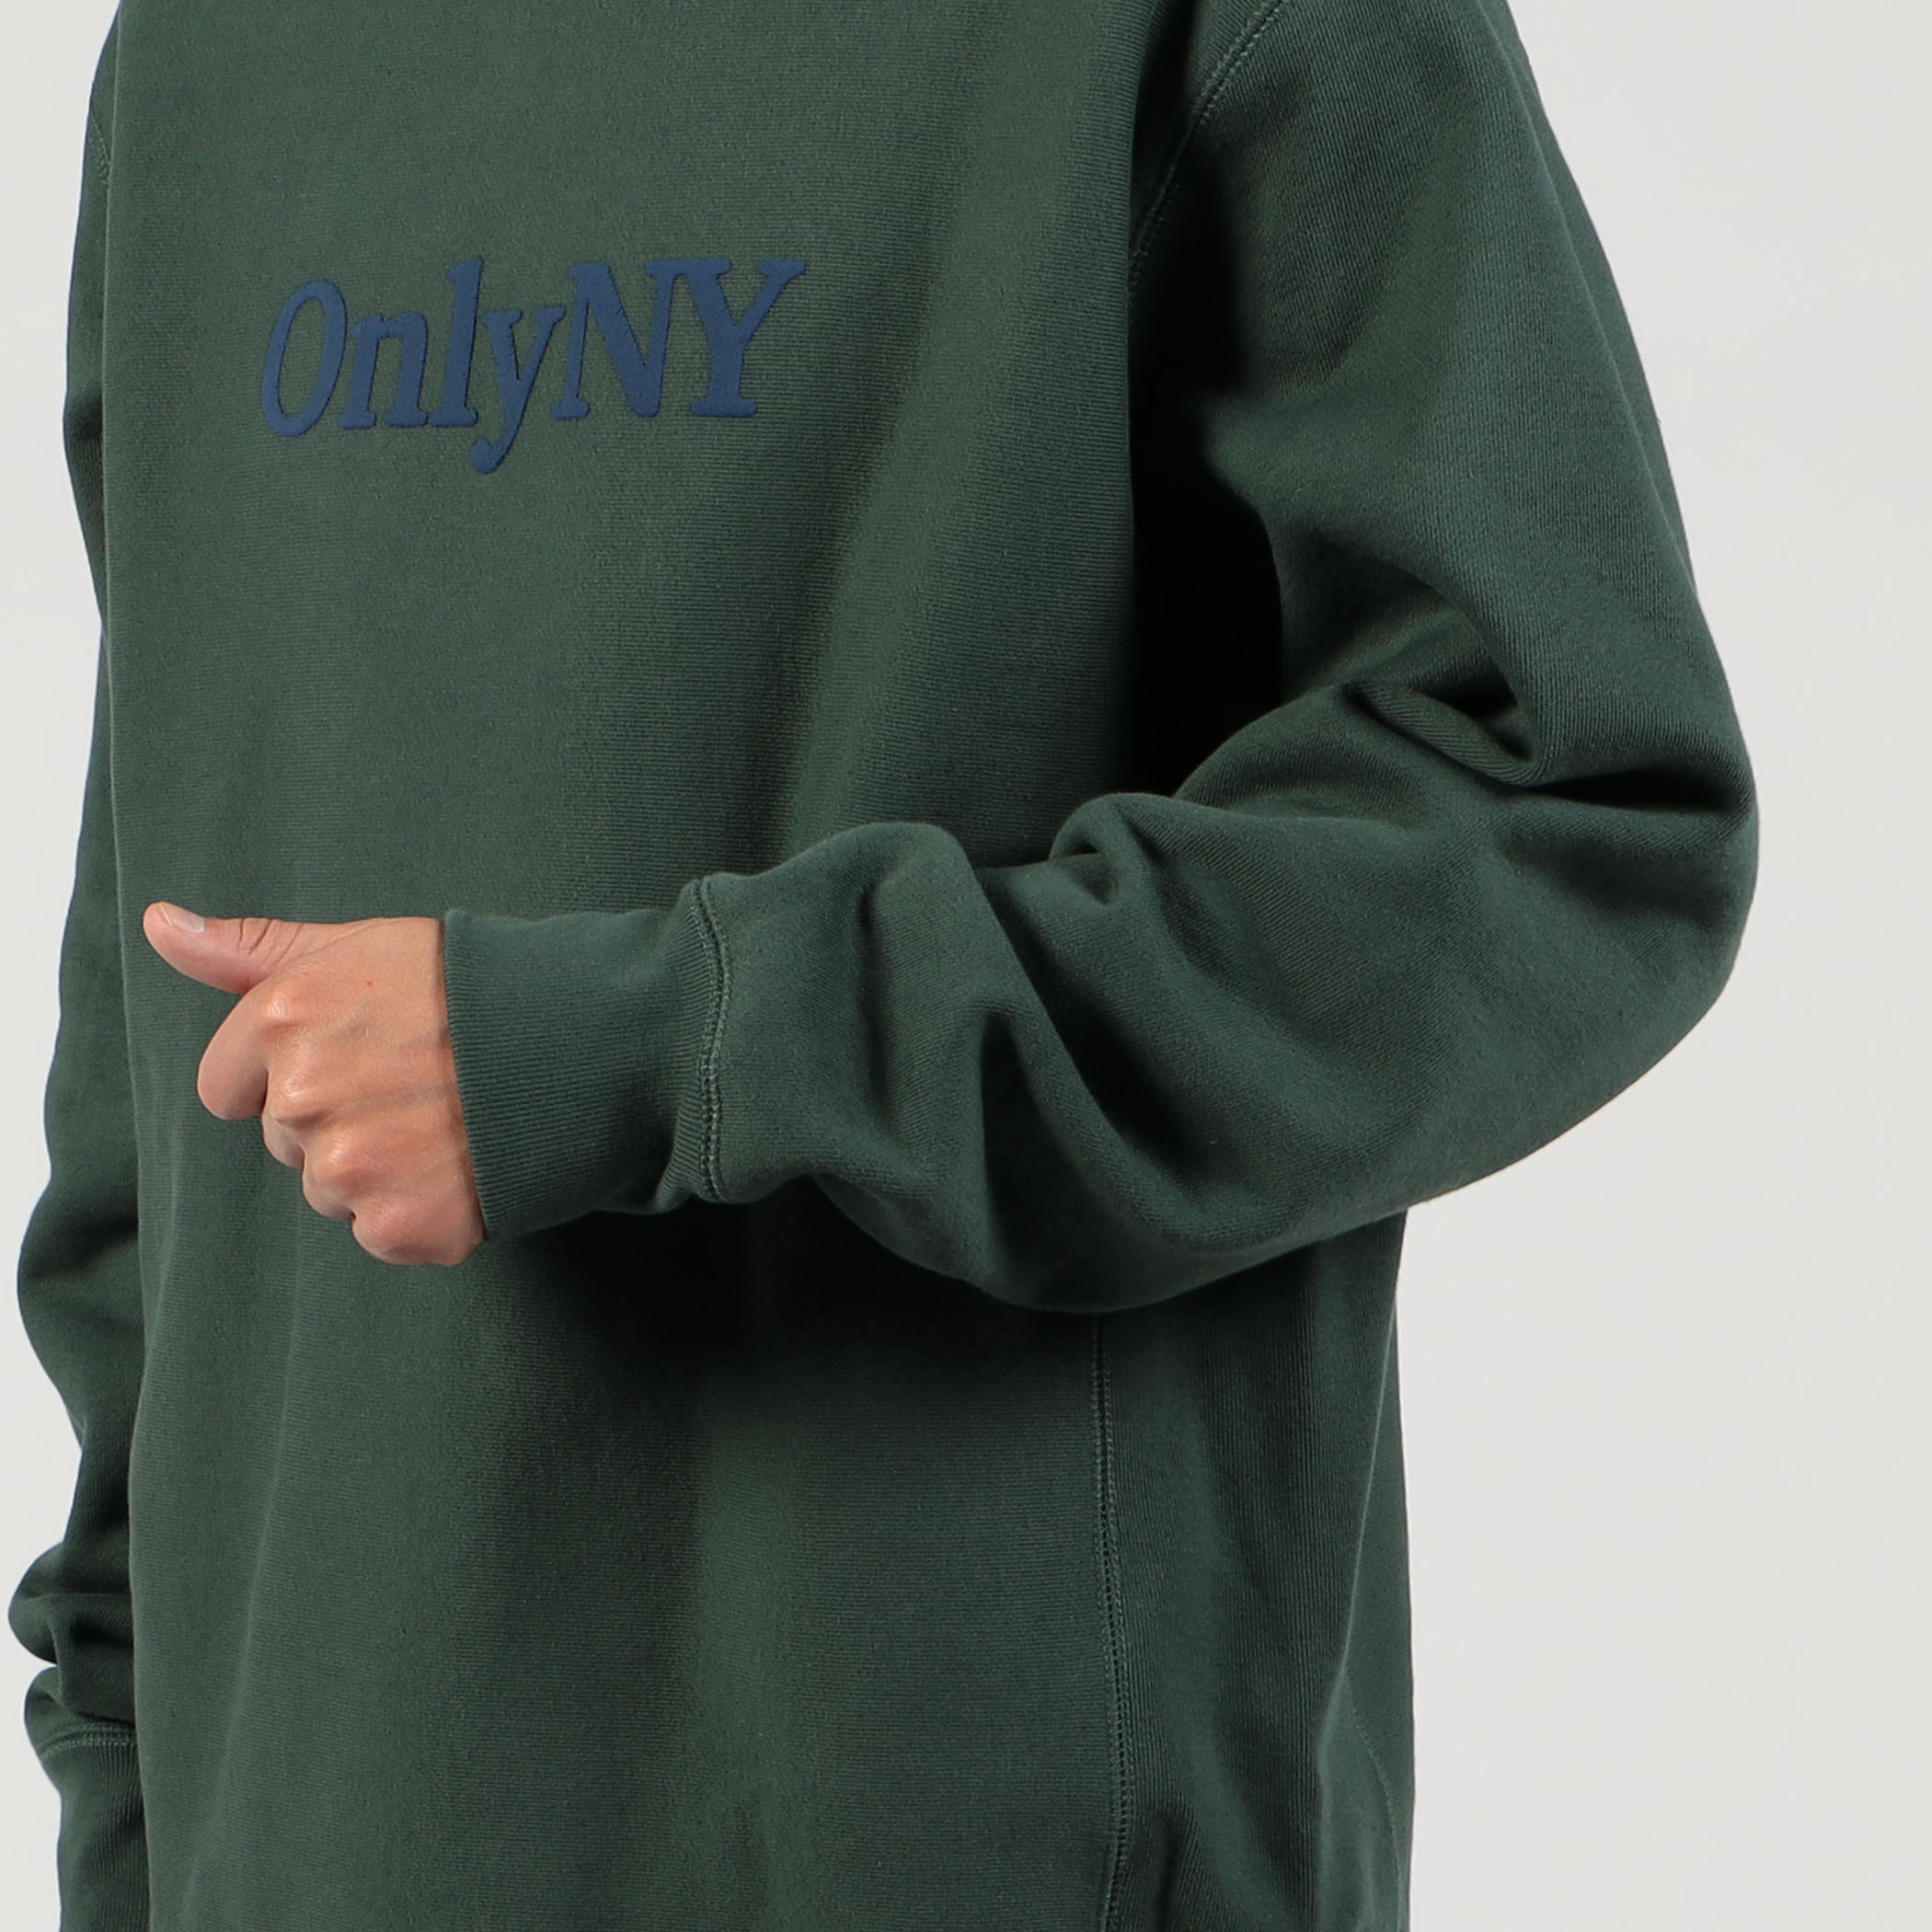 Only NY Premium French Terry Crewneck